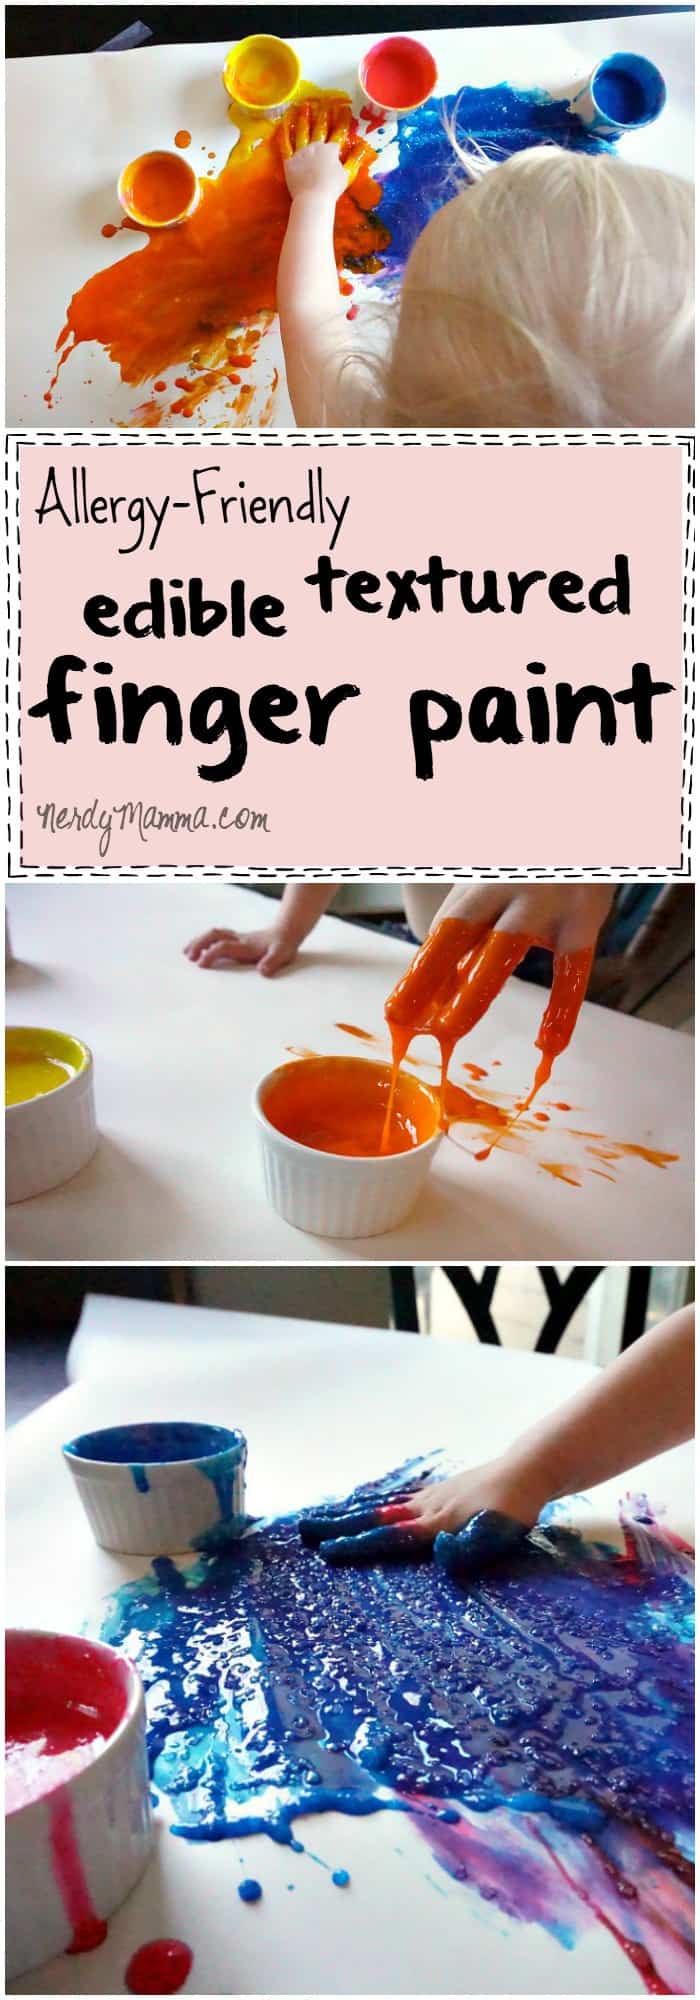 I absolutely love this easy recipe for gluten-free (and other allergy-friendly) edible textured finger paint. It's so ridiculously easy!